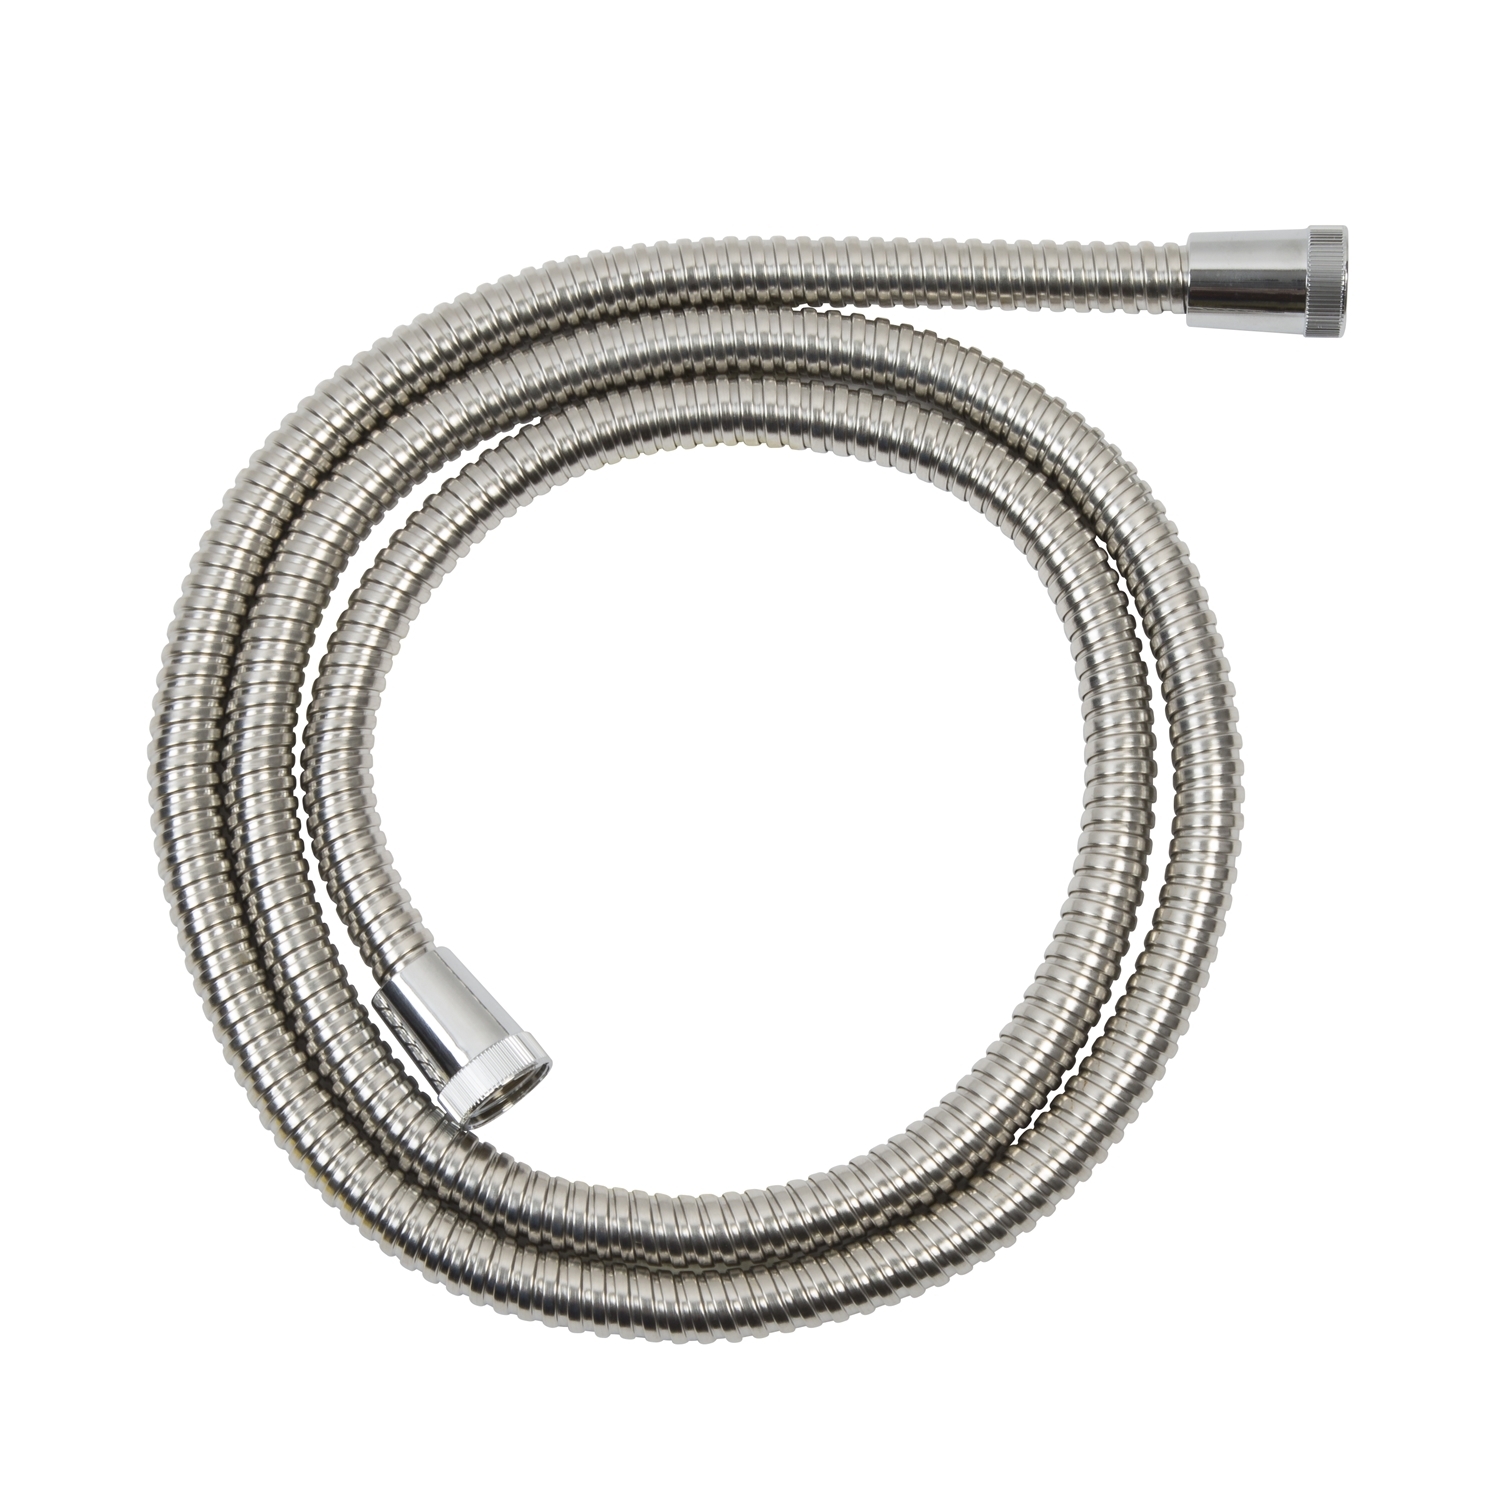 1.75m Premium Stainless Steel Shower Hose - Silver Image